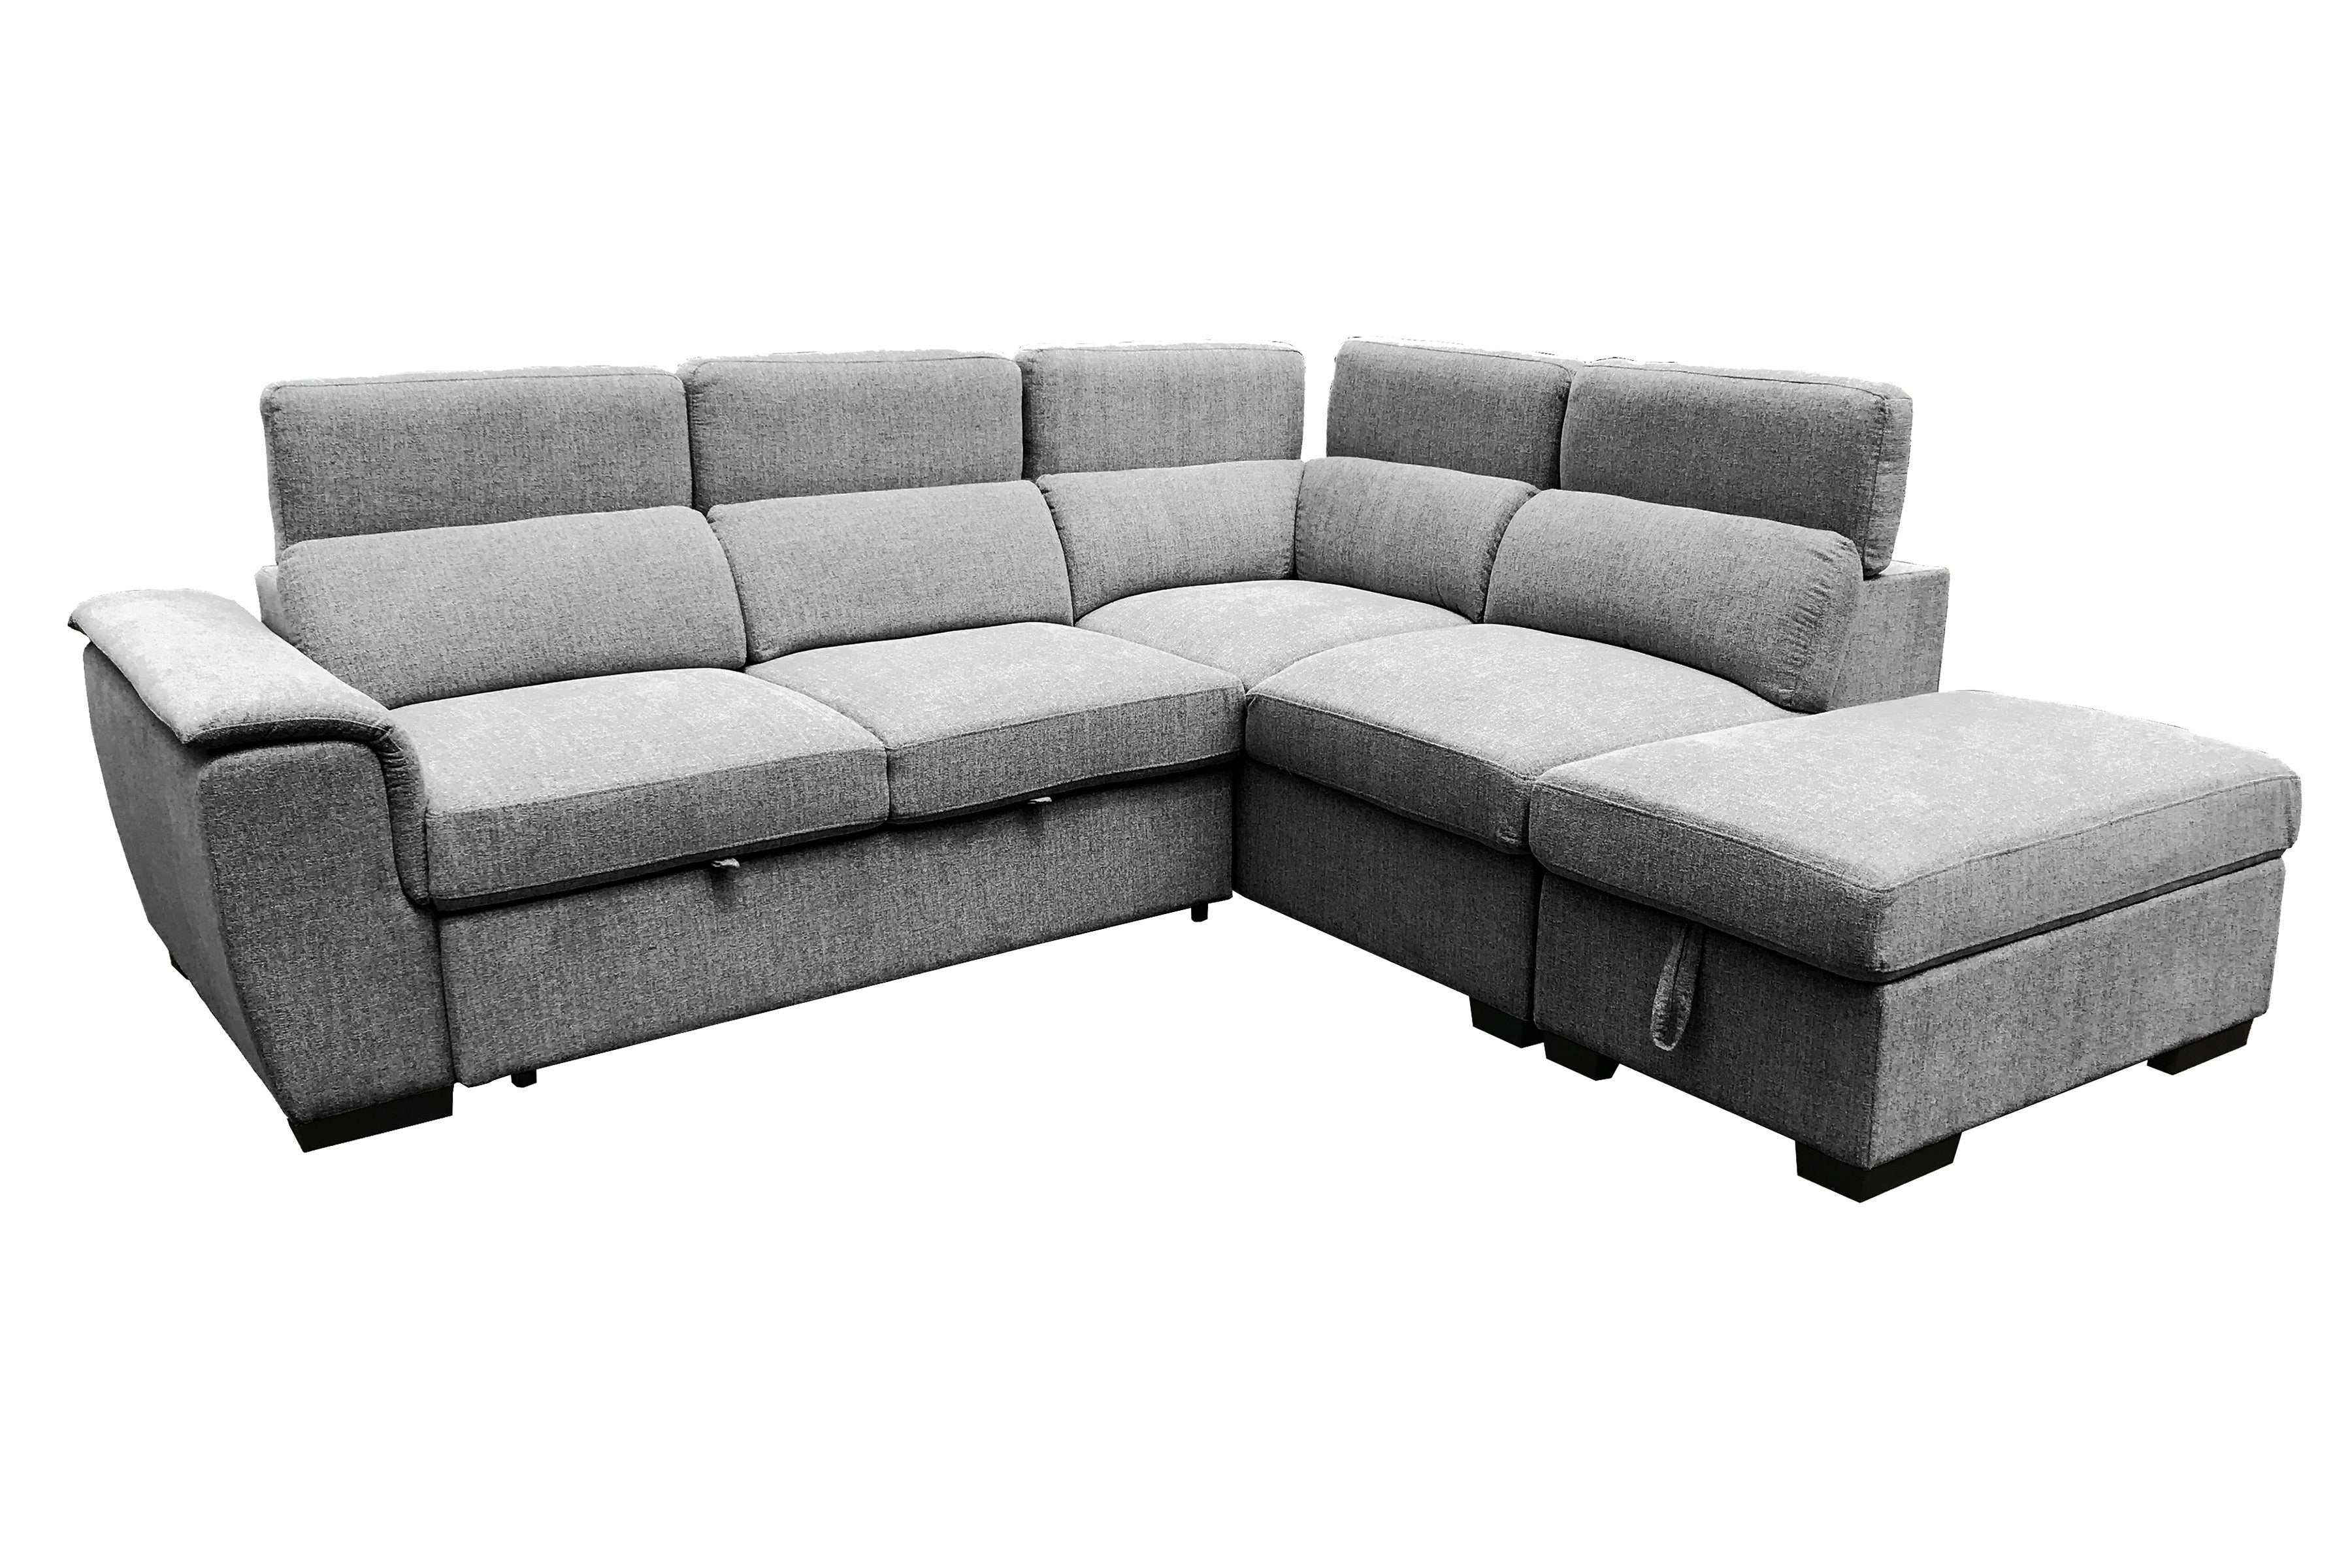 CAROLINA - FABRIC SECTIONAL WITH PULL OUT BED WITH ADJUSTABLE HEADREST